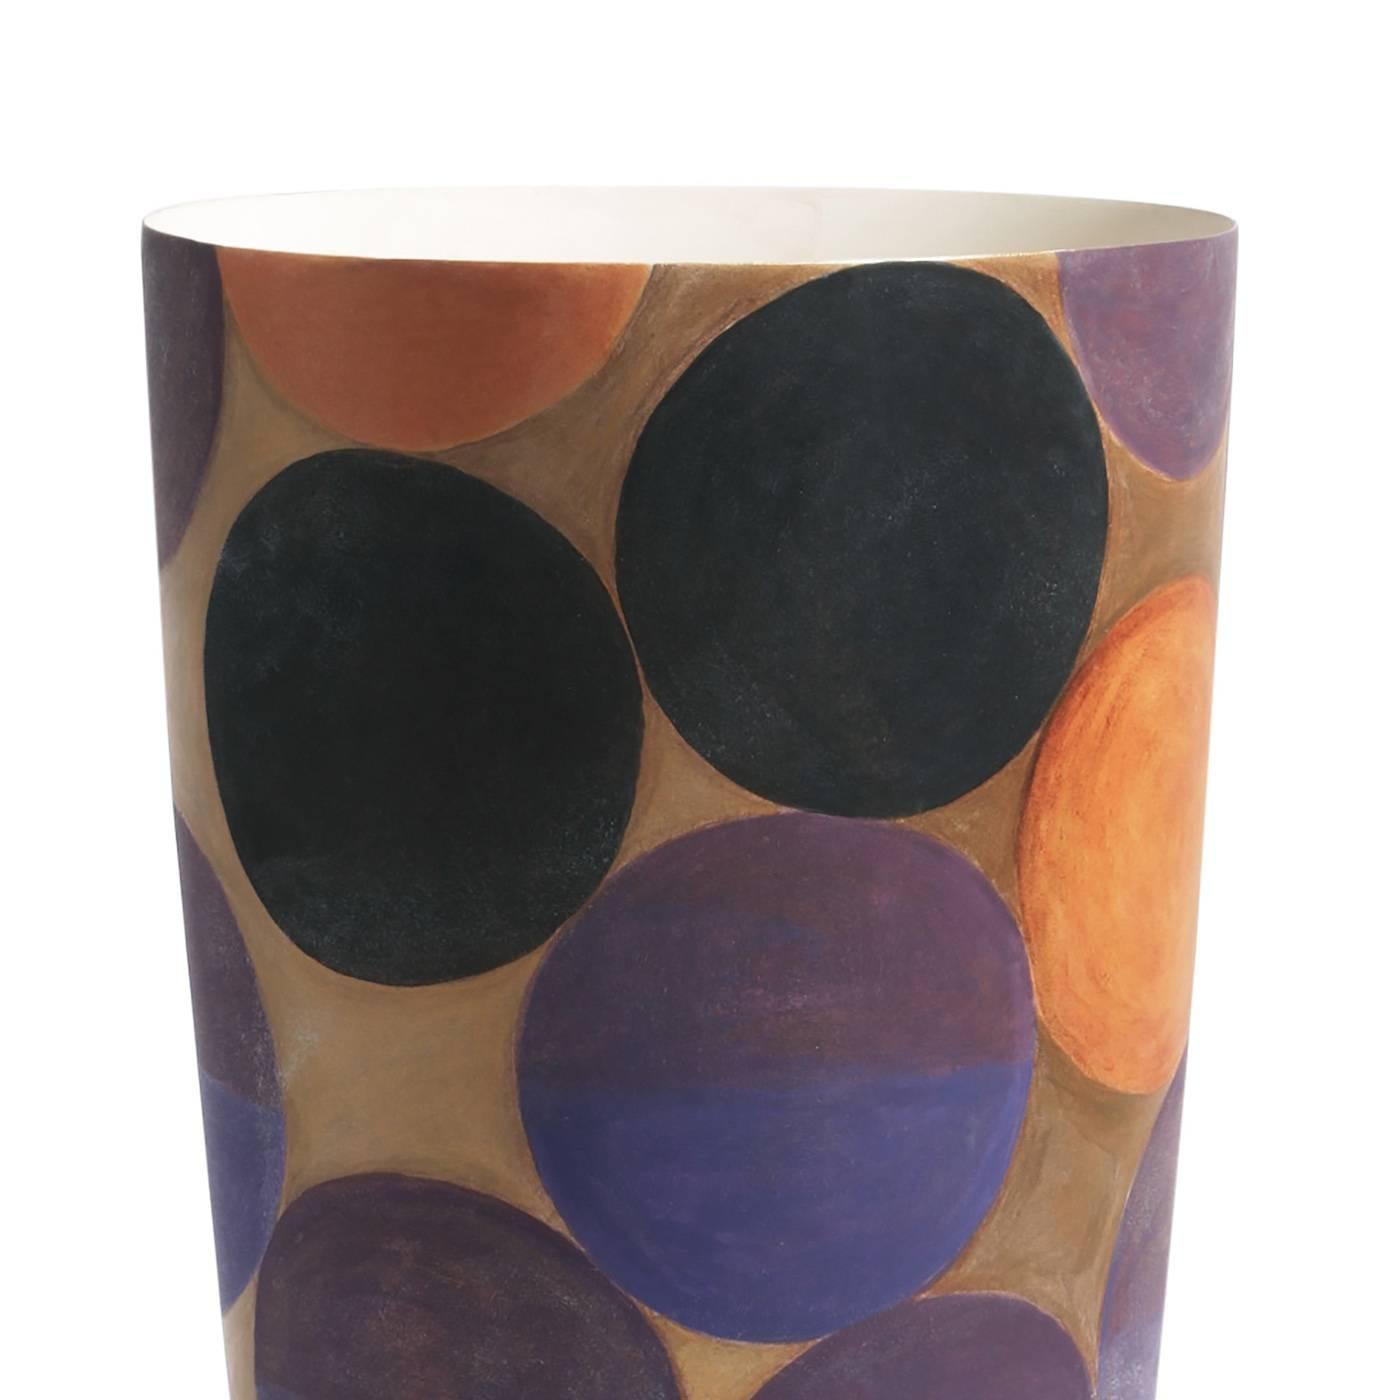 Colorful and playful, this ceramic vase belongs to a limited edition of 50 pieces that were all hand-painted. The simple conic shape of the vase is enriched outside with a series of multicolored large dots in purple, pink, blue, and black almost